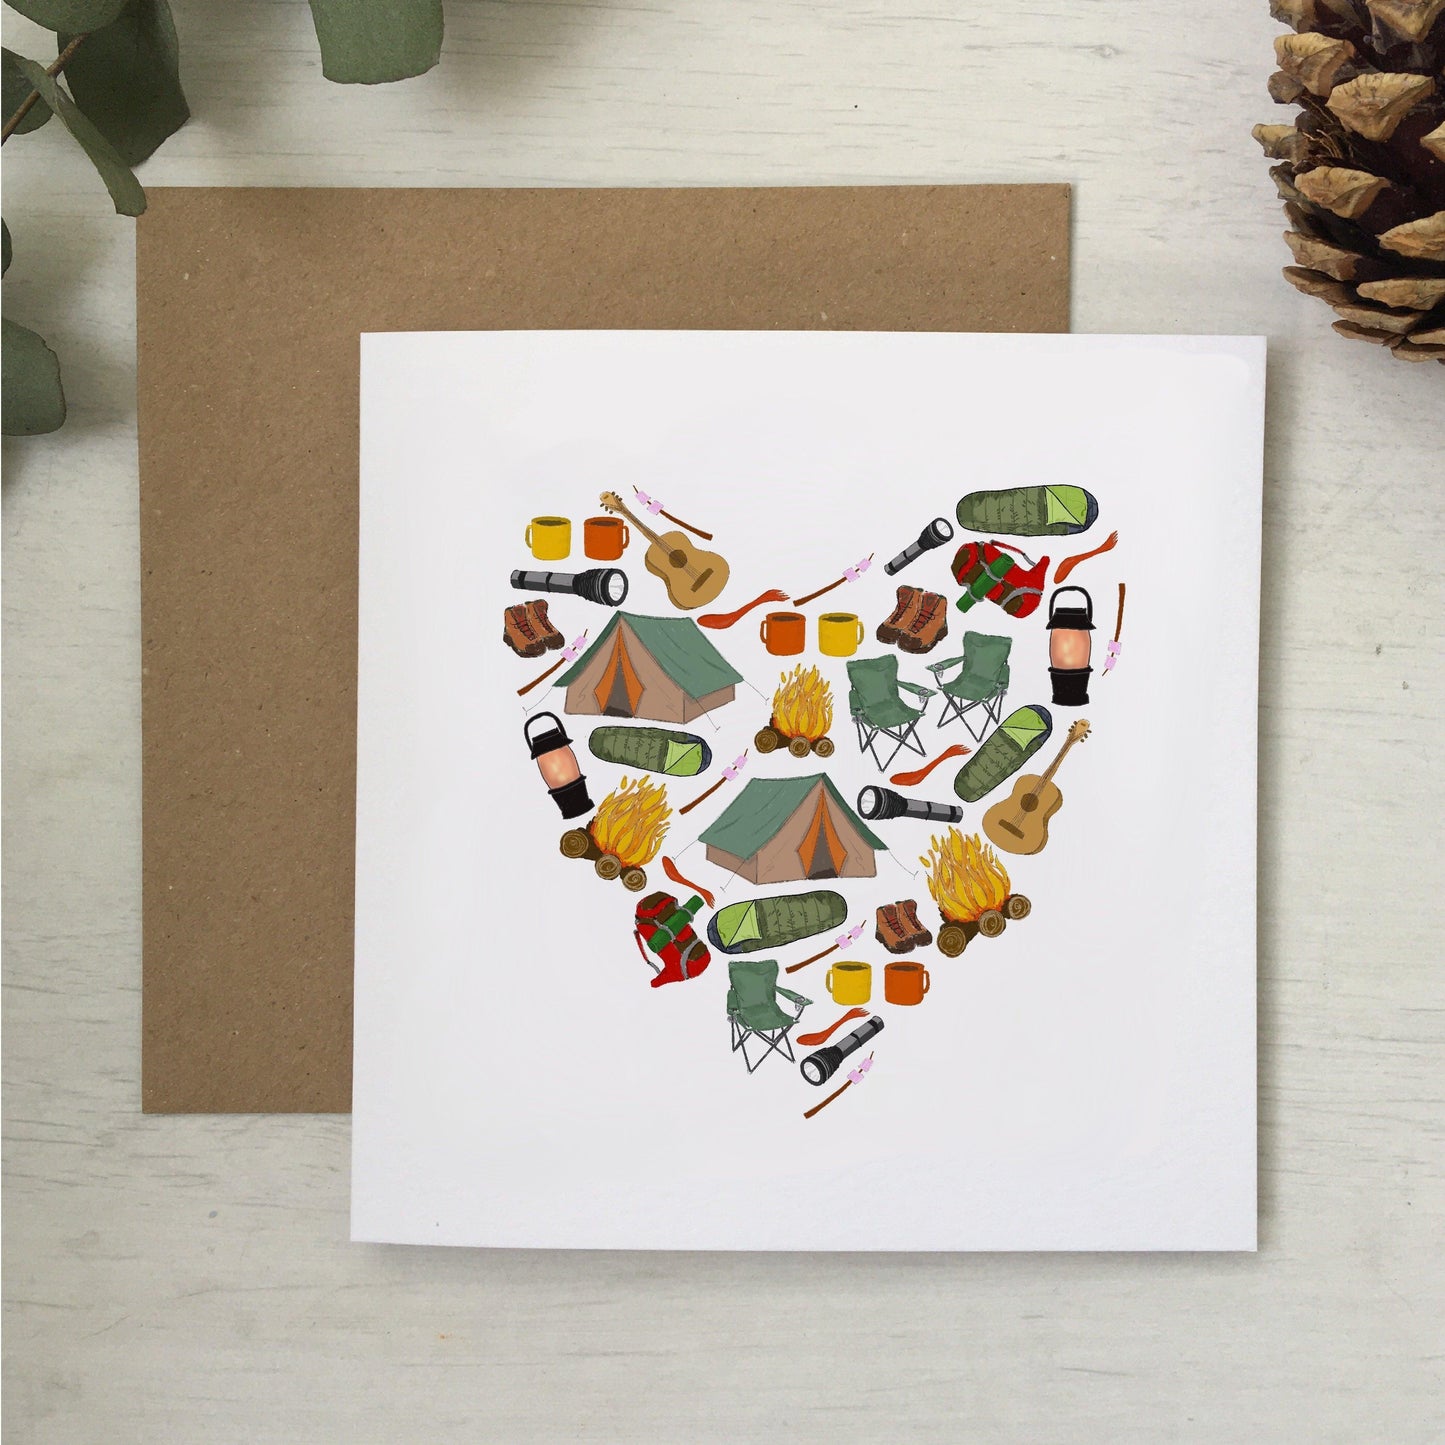 camping themed greeting card with illustrated camping items in a heart shape